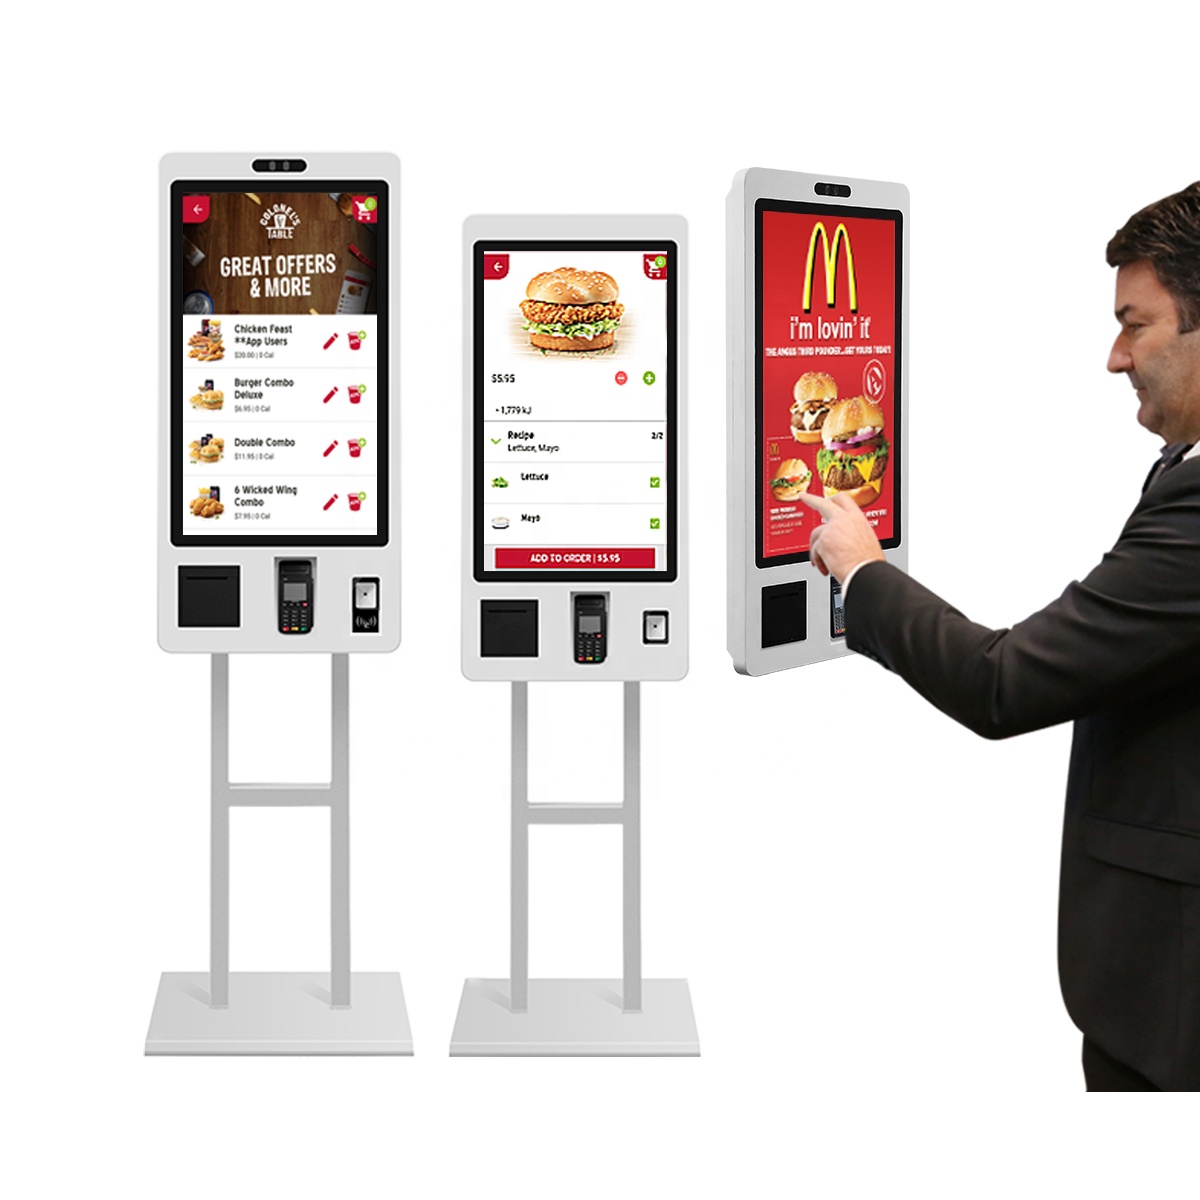 https://www.layson-display.com/32-inch-touch-screen-self-service-payment-ordering-kiosk-for-fastfood-mcdonaldskfcrestaurantsupermarket-product/